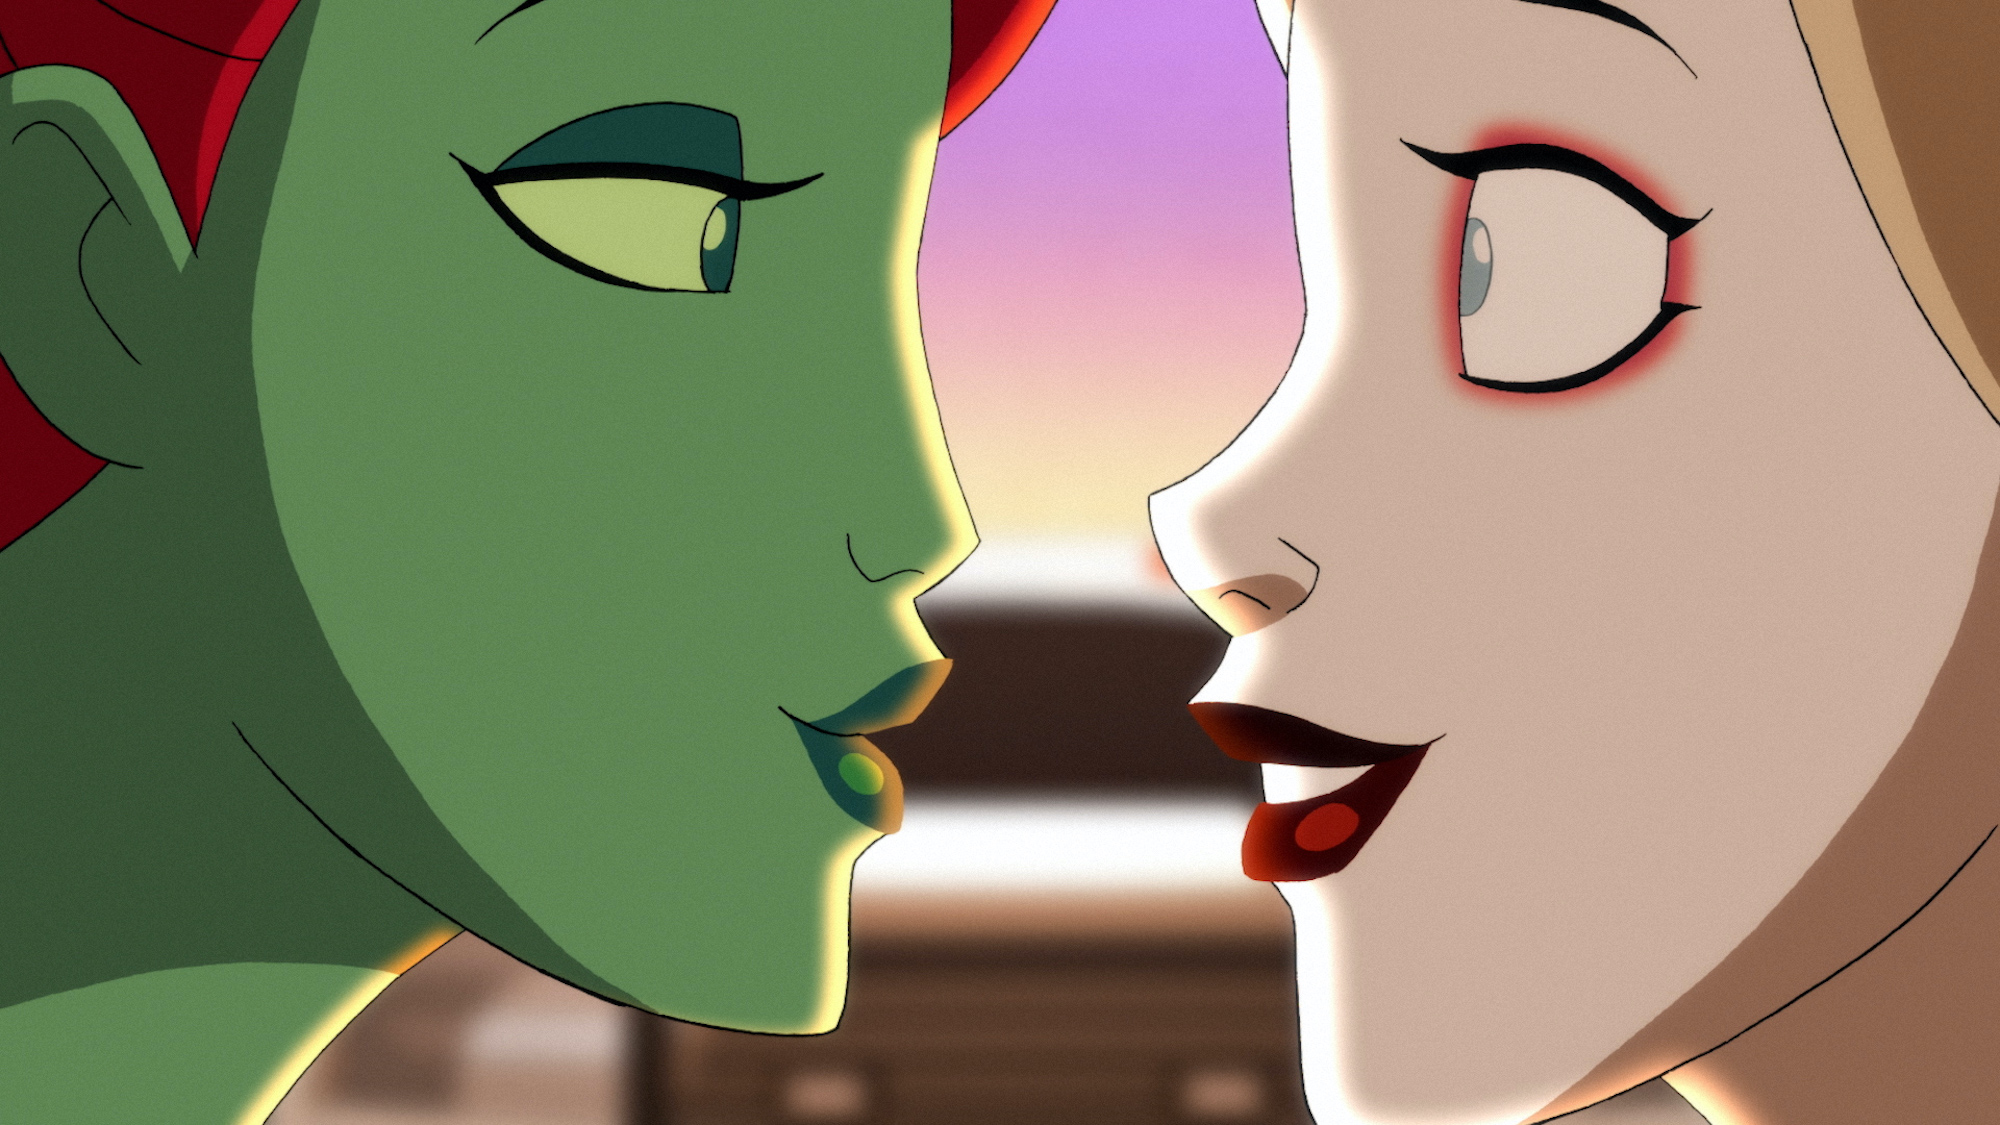 Poison Ivy and Harley Quinn in the season 2 finale of 'Harley Quinn' on HBO Max